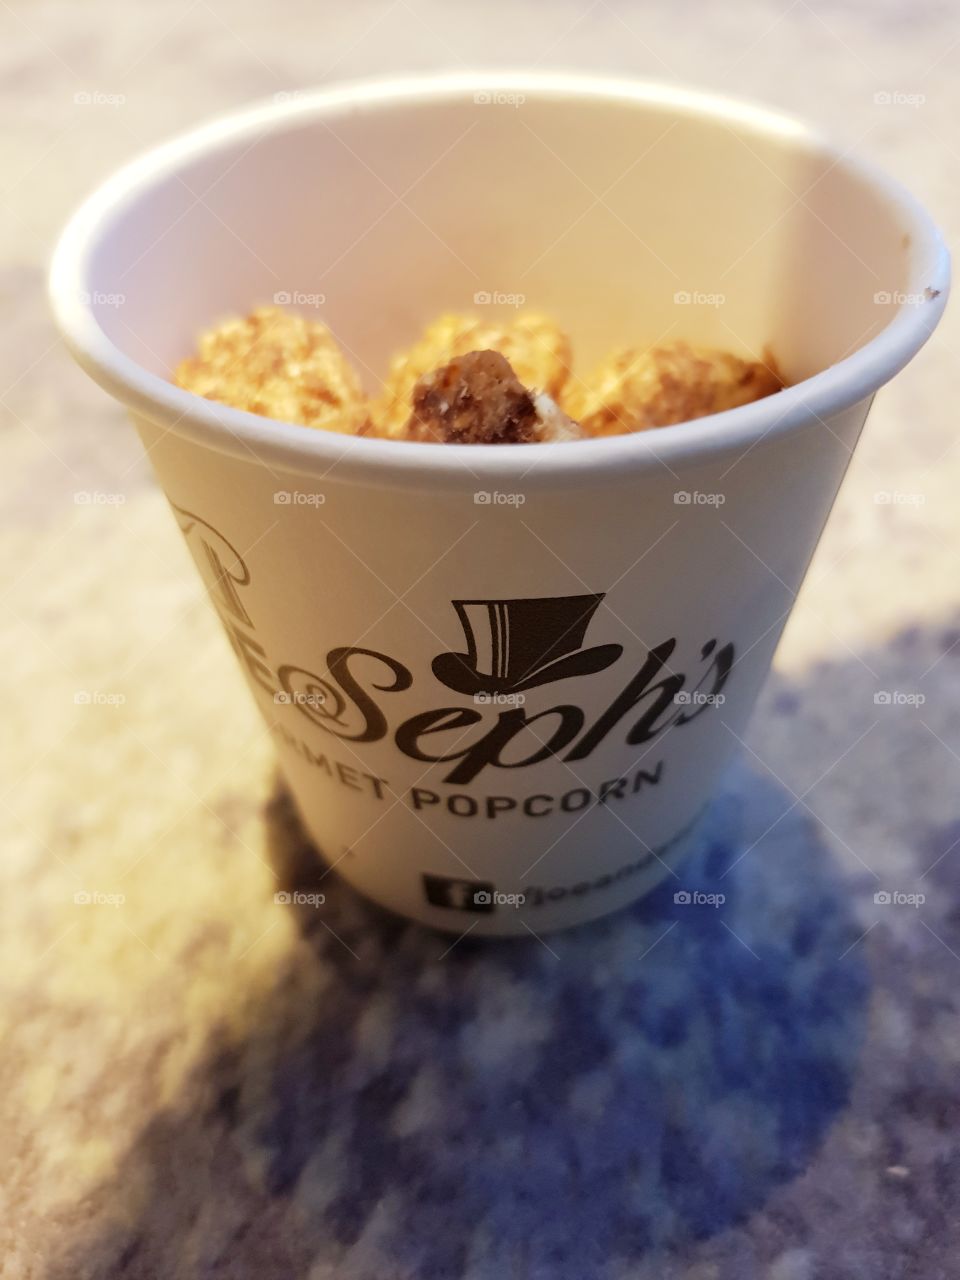 JoeandSephs cookies and cream popcorn handmade air popped gourmet snacks in a paper cup